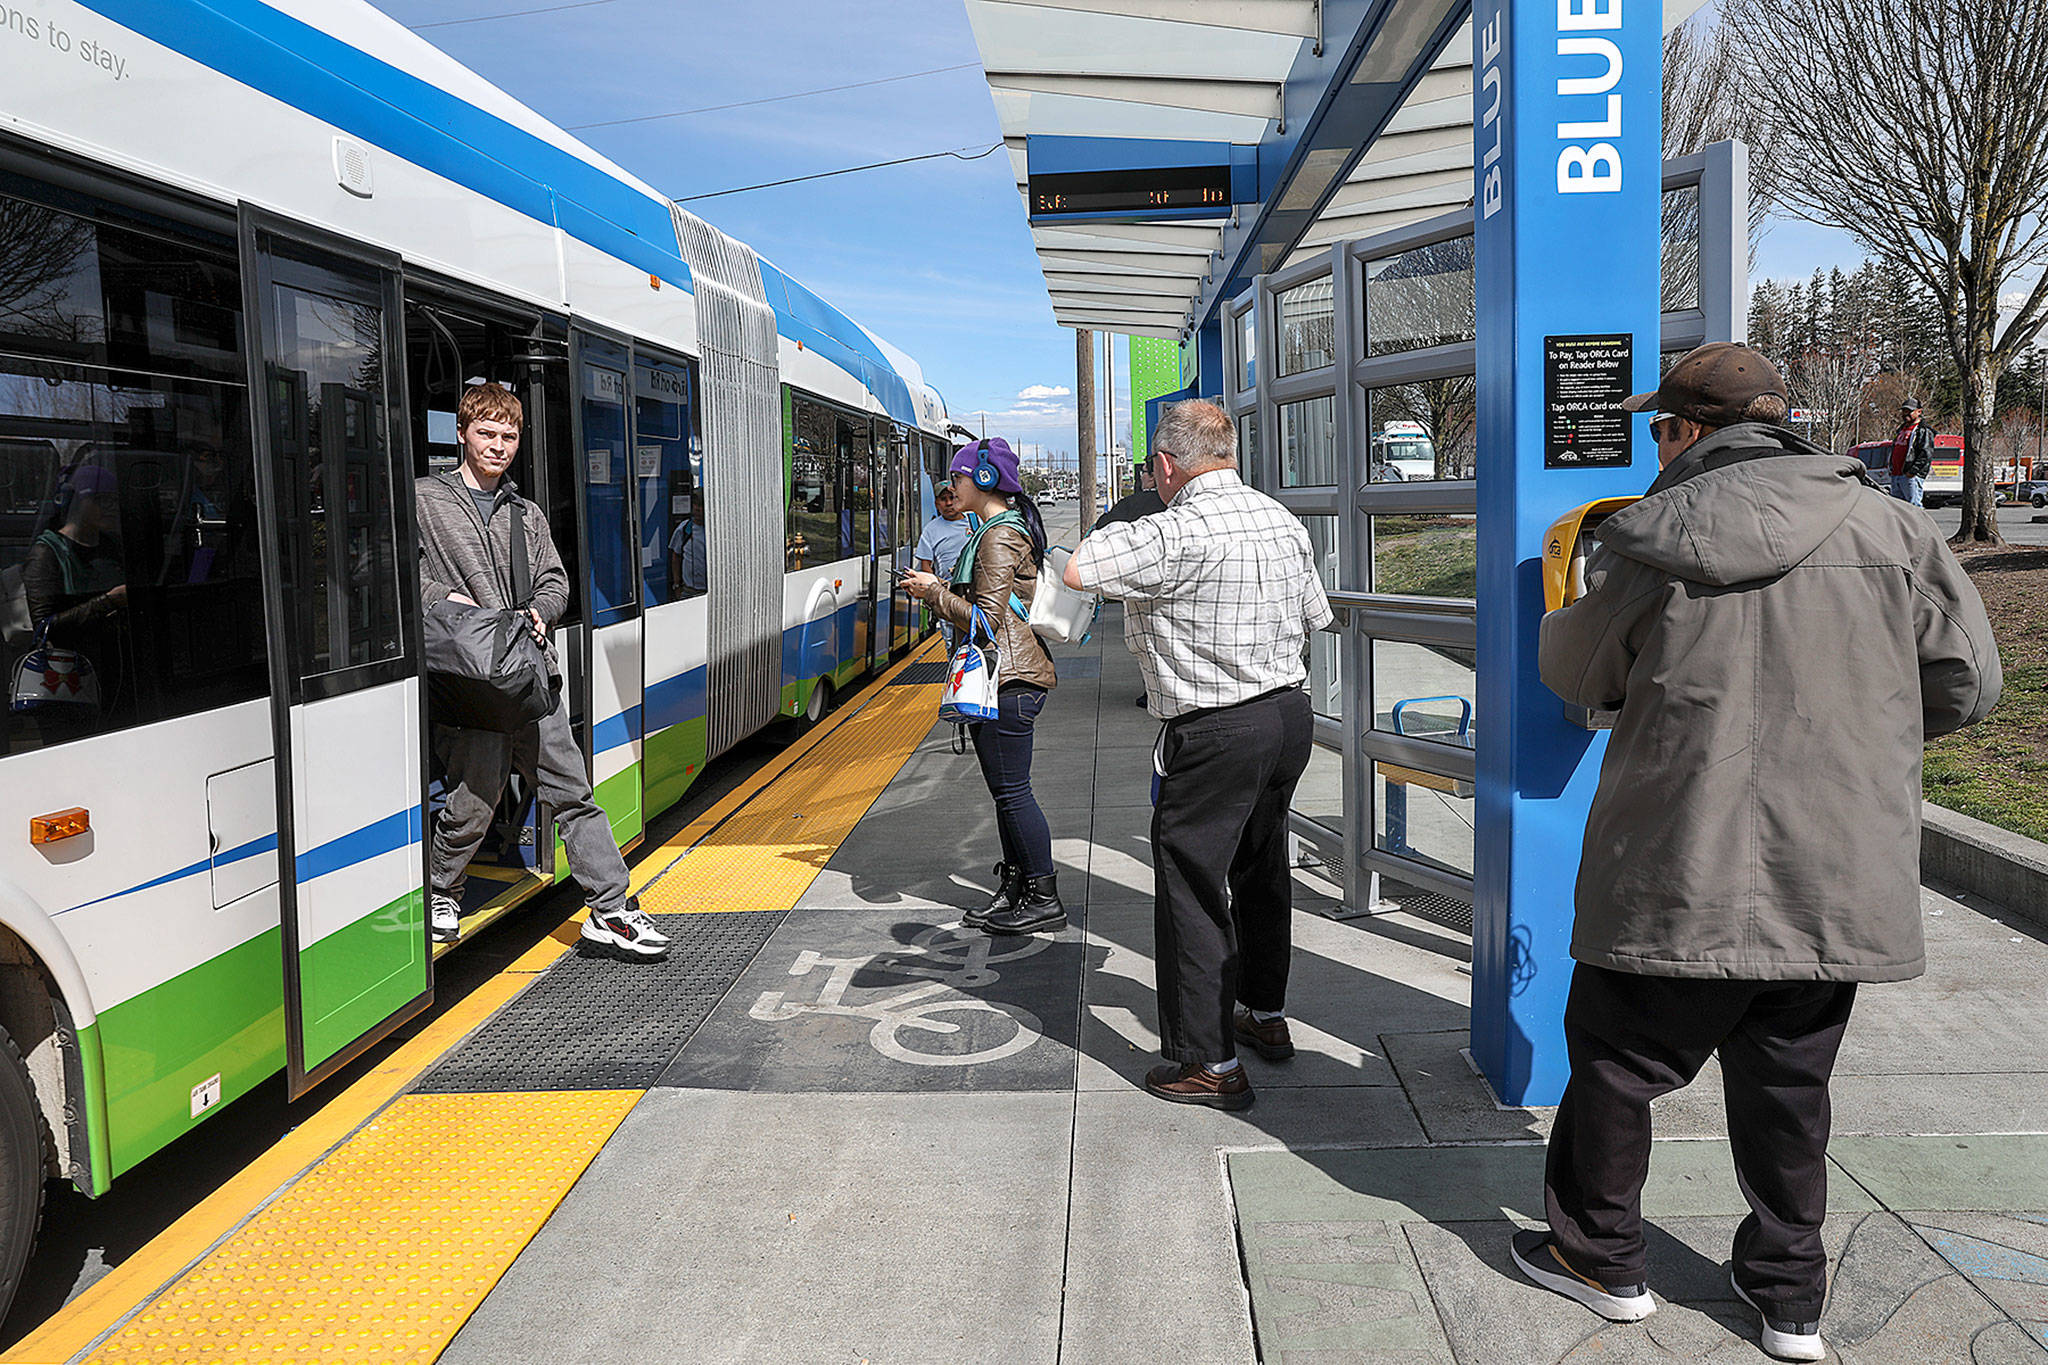 How tolerable is the transfer between Community Transit’s Swift Green and Blue lines? Not too bad for this rider. (Lizz Giordano / The Herald)